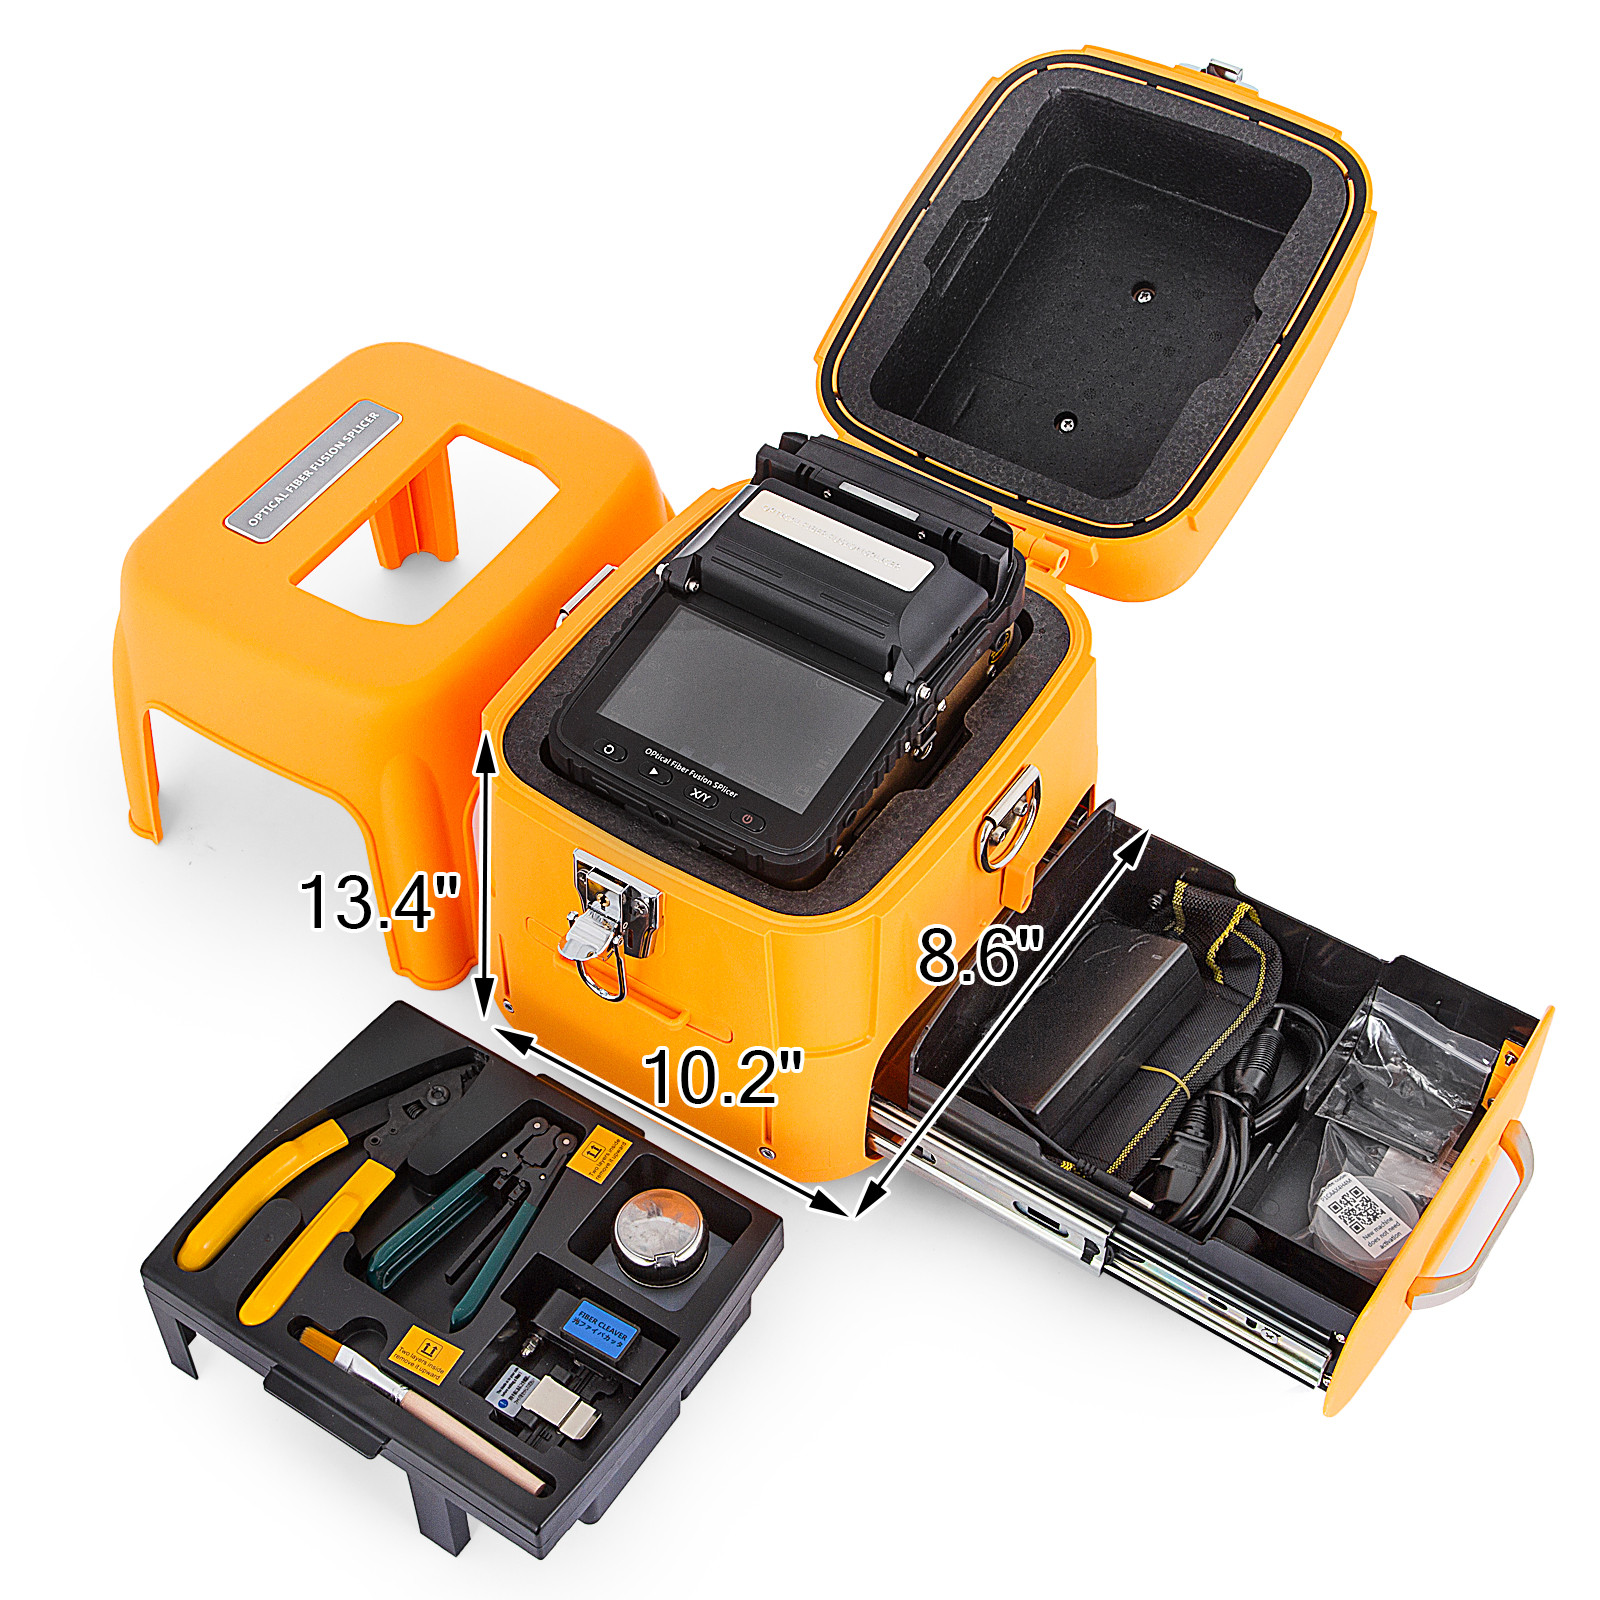 VEVOR VEVOR AI-8 Fiber Fusion Splicer with Seconds Splicing Time Melting  15 Seconds Heating Fusion Splicer Machine Optical Fiber Cleaver Kit for Optical  Fiber  Cable Projects for Railway Electric Power